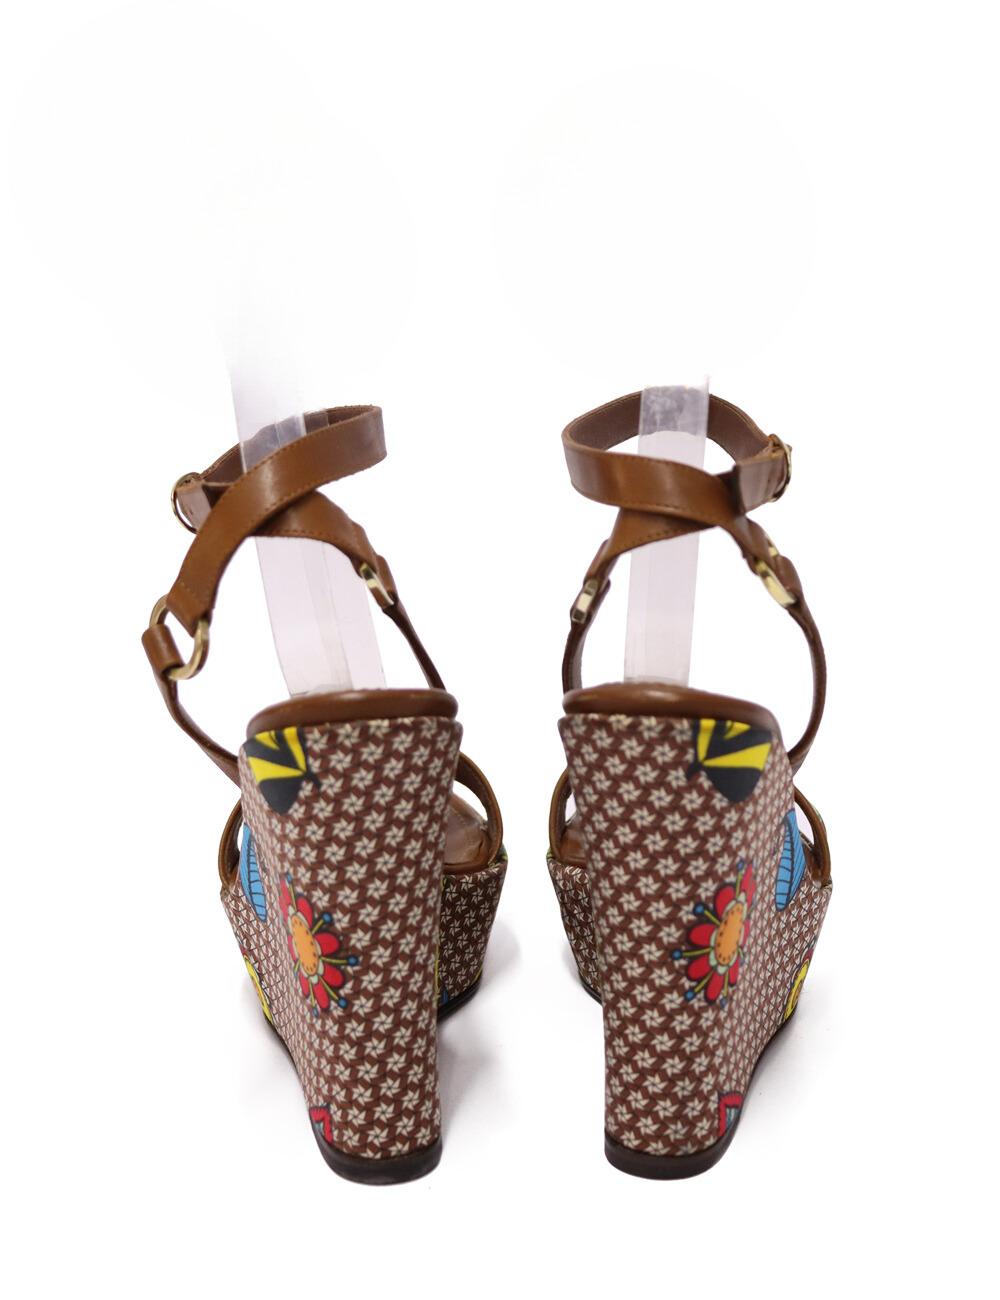 Sergio Rossi Multicolor Printed Leather Ankle-Wrap Sandals Size EU 37 In Good Condition For Sale In Amman, JO